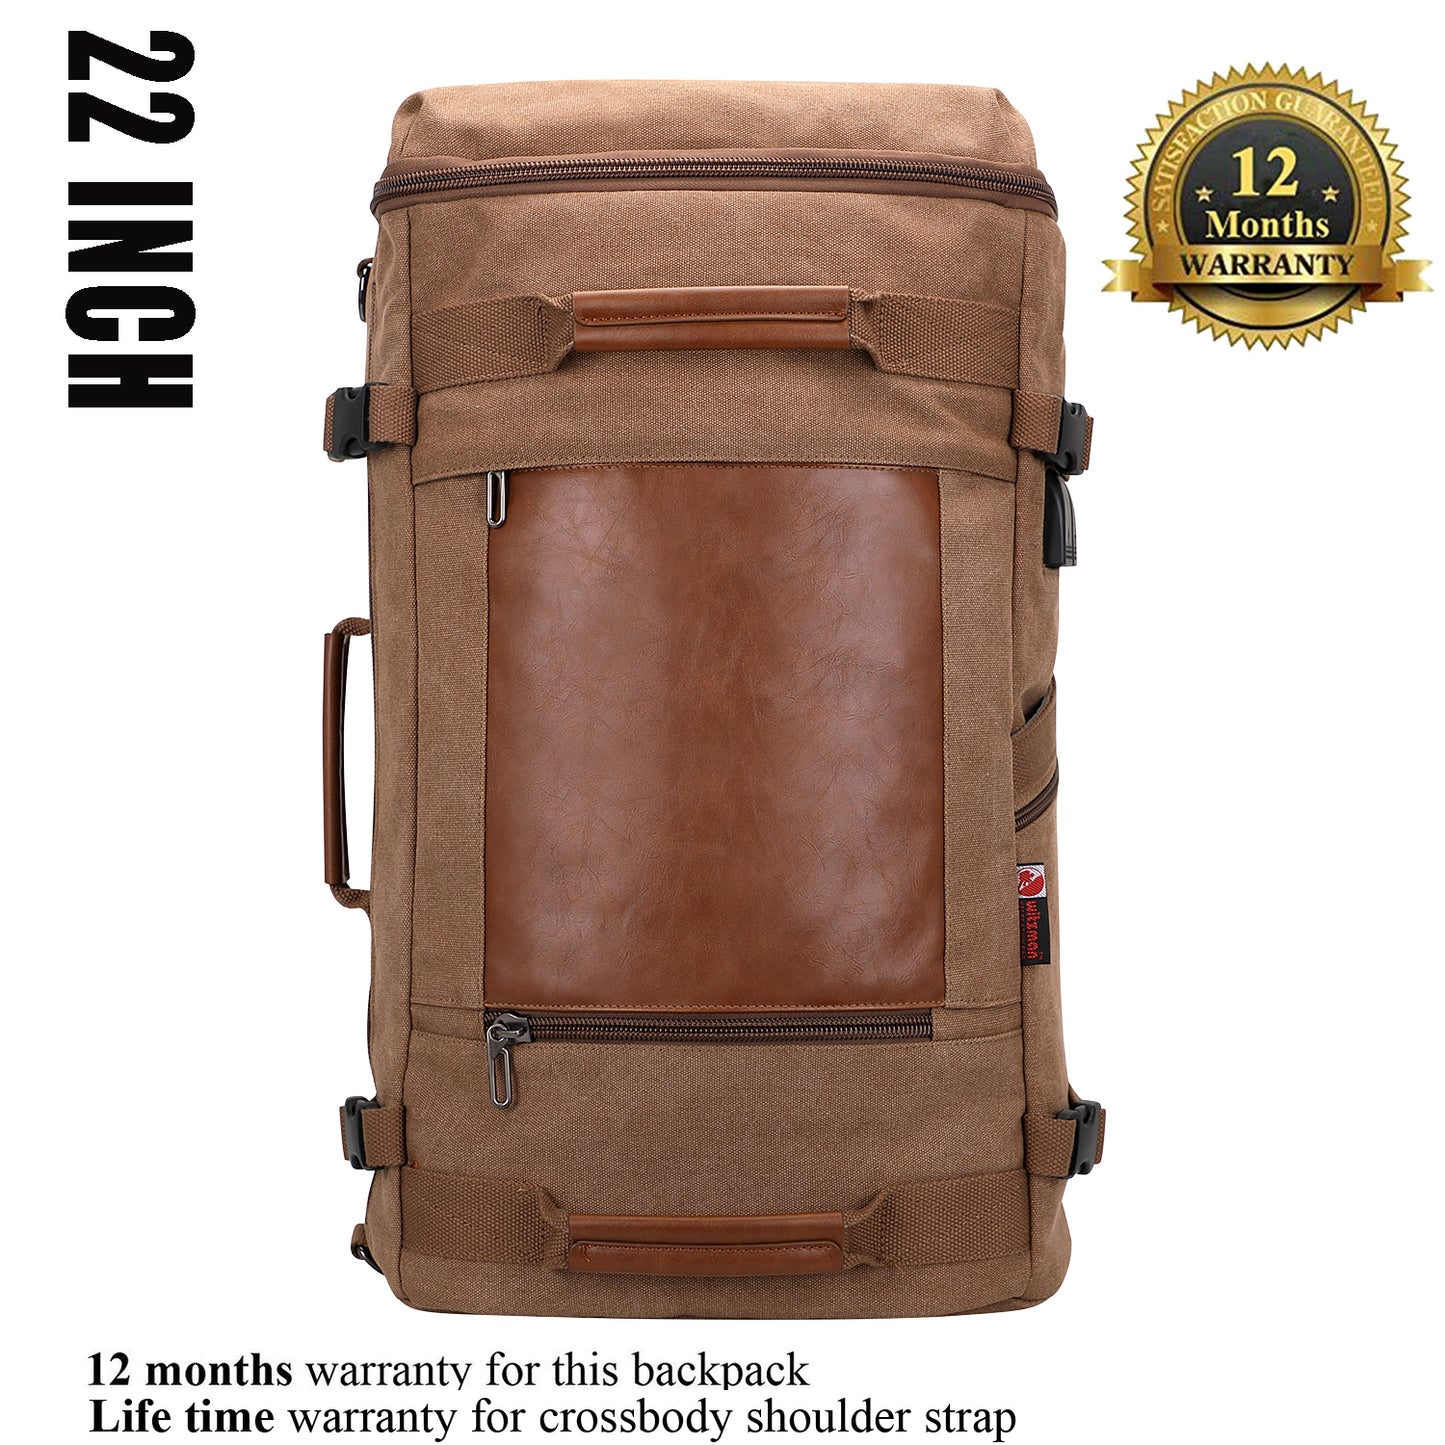 WITZMAN Large Canvas Travel Backpack